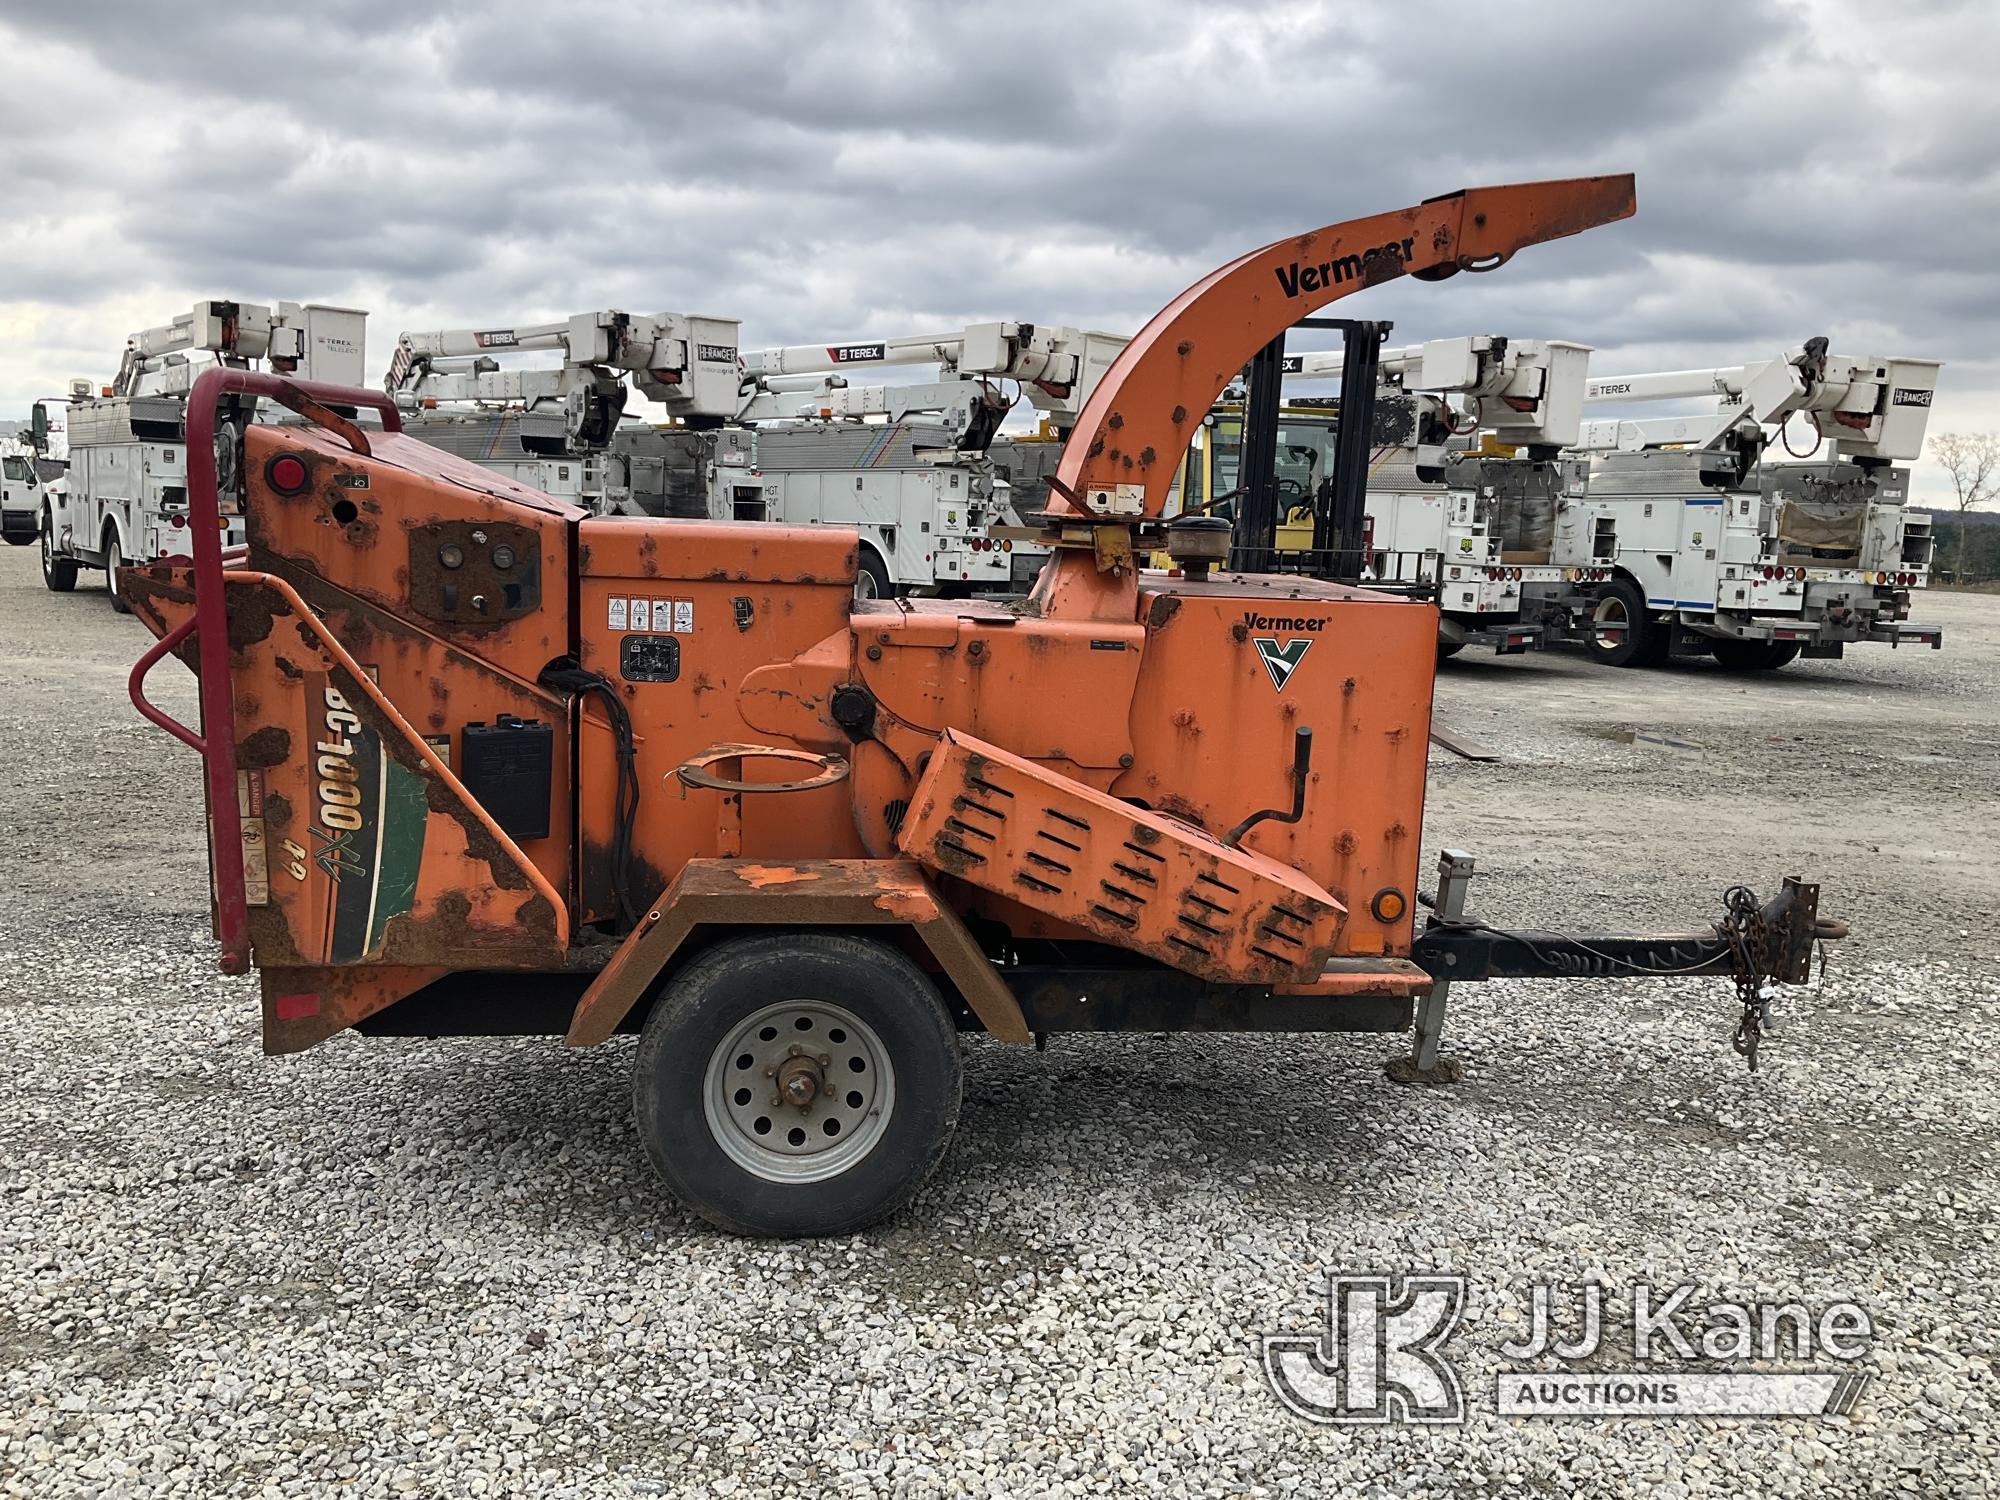 (Shrewsbury, MA) 2013 Vermeer BC1000XL Chipper (12in Drum) Runs) (Operating Condition Unknown, Rust